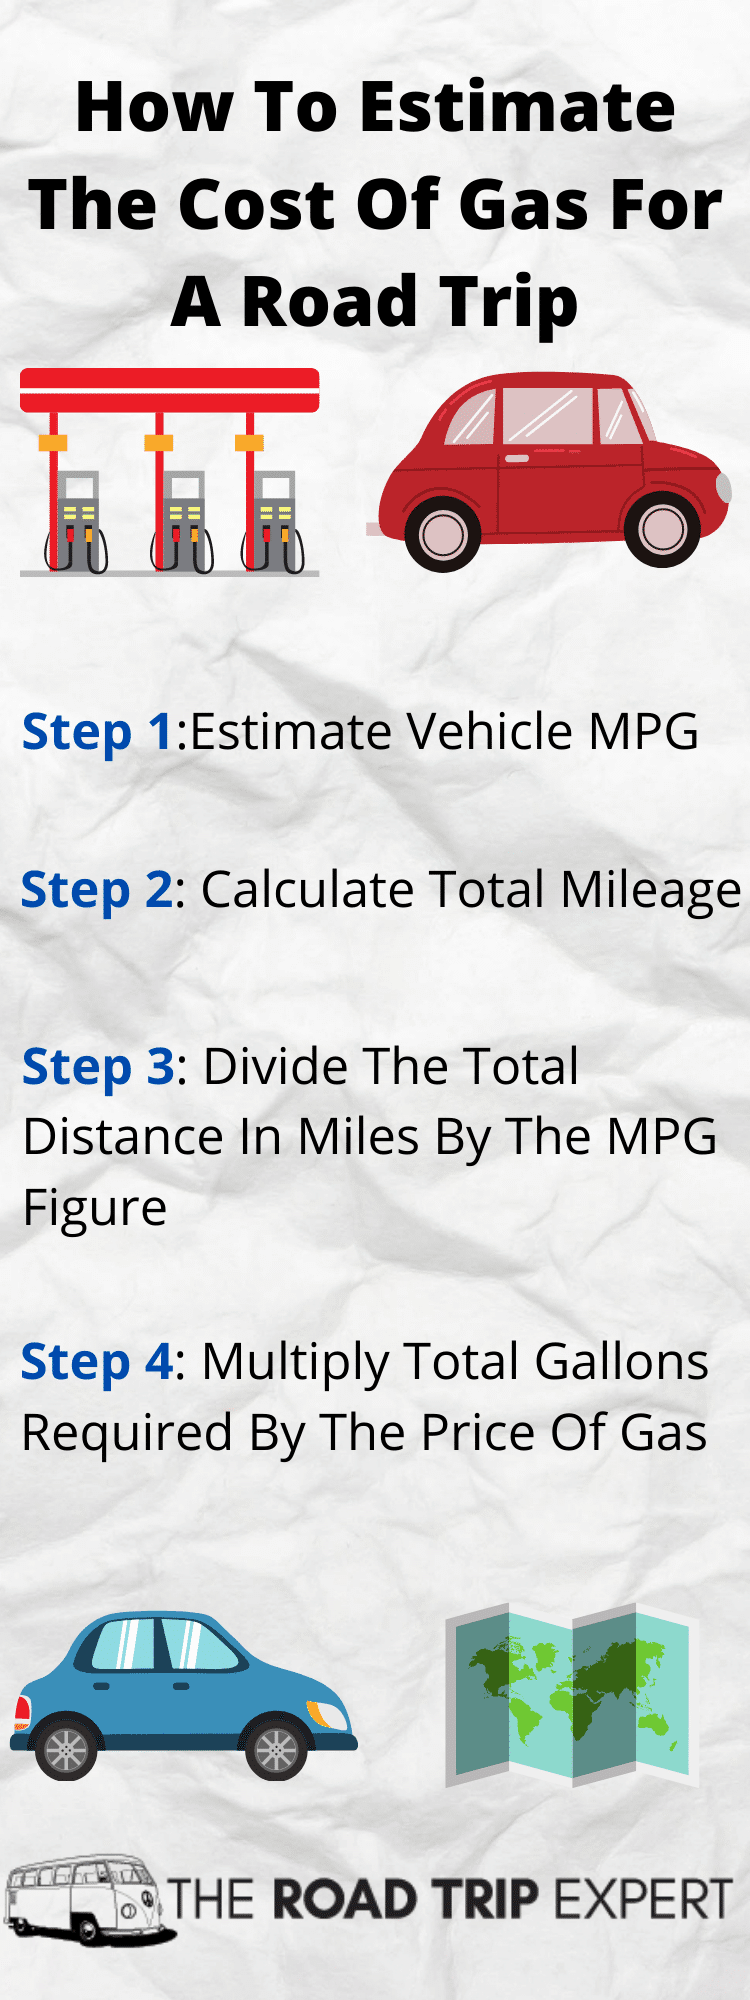 how to estimate the cost of gas for a road trip